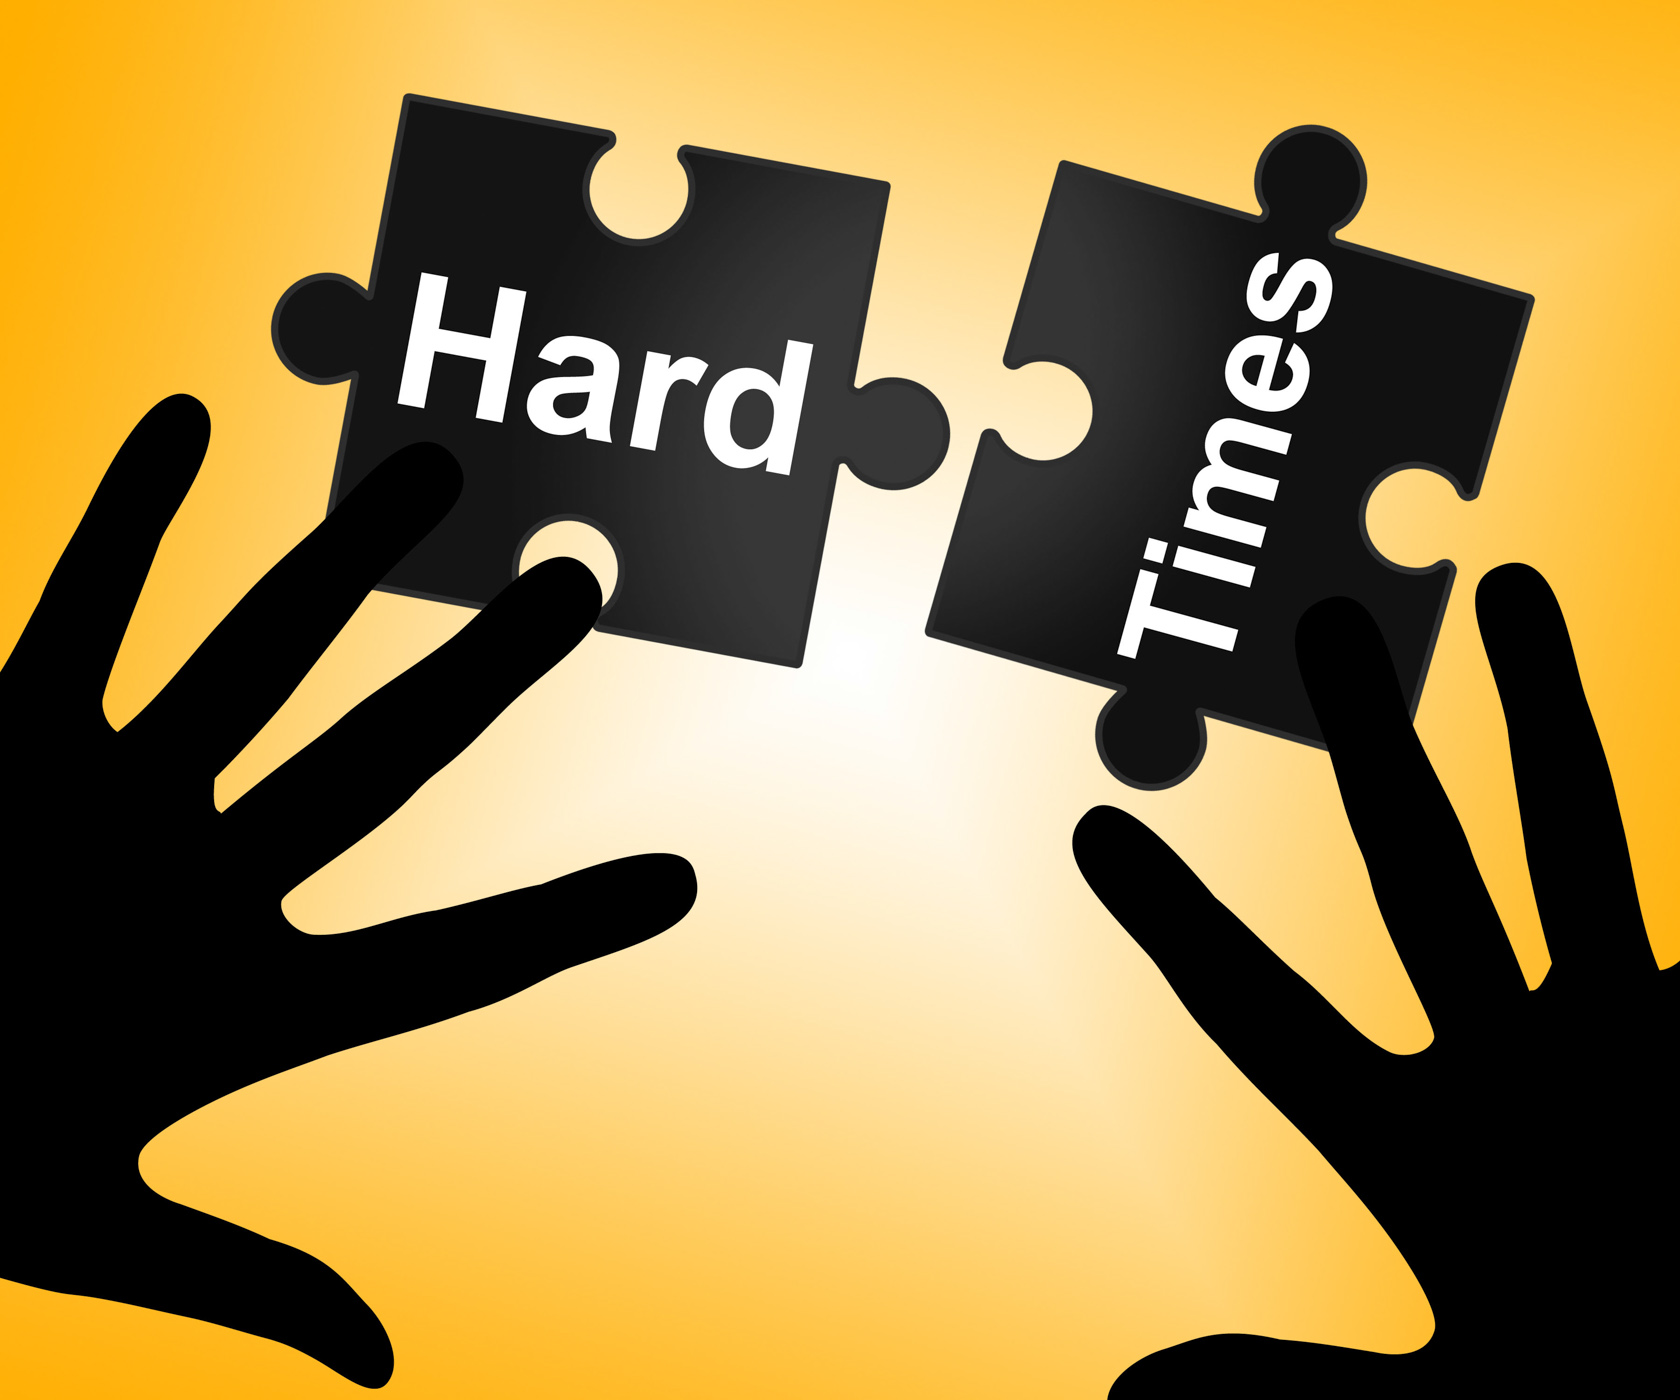 Hard Times Indicates Overcome Obstacles And Challenge, Challenge, Challenges, Difficult, Difficulties, HQ Photo